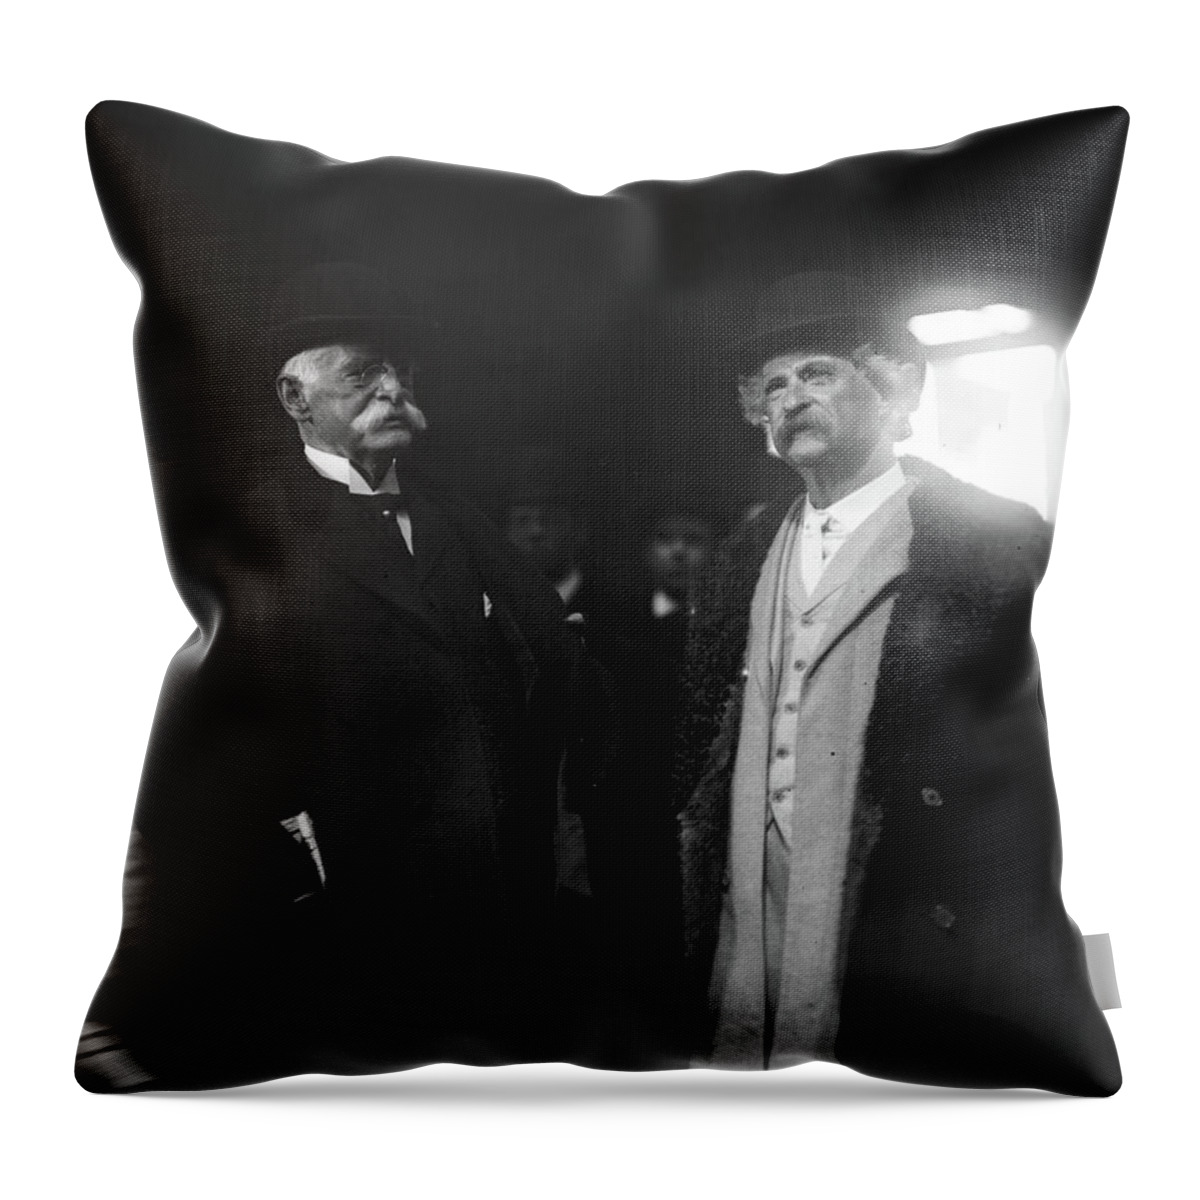 1890 Throw Pillow featuring the photograph Rogers And Clemens, C1900 by Granger